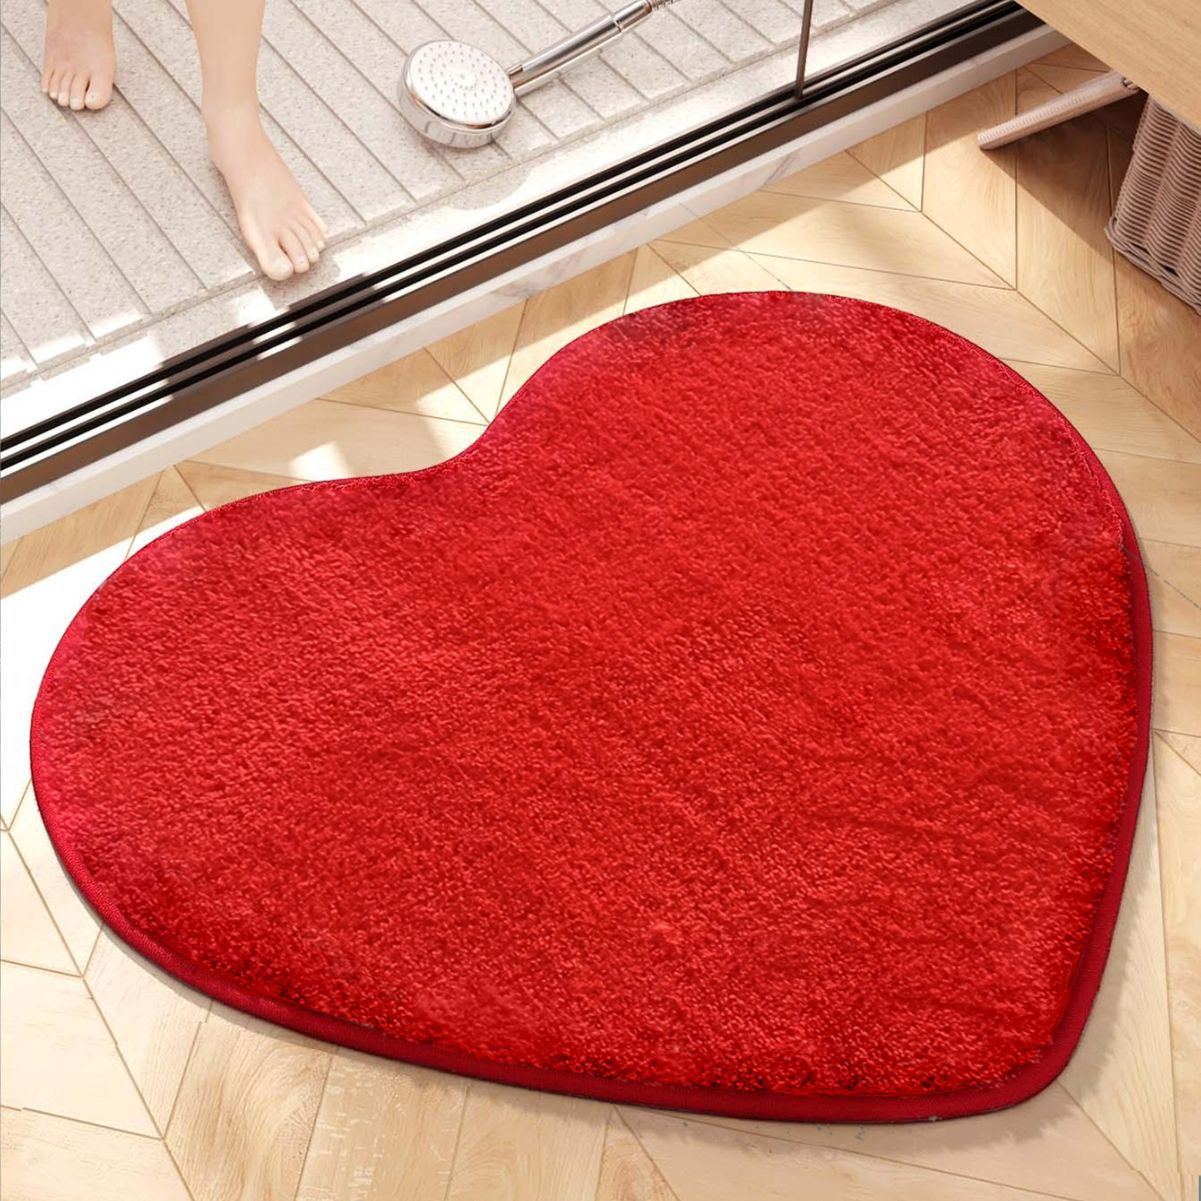 Cross-Border Hot Products Home Love Mat Polyester Plush Fast Absorbent Carpet Spot Delivery in Seconds